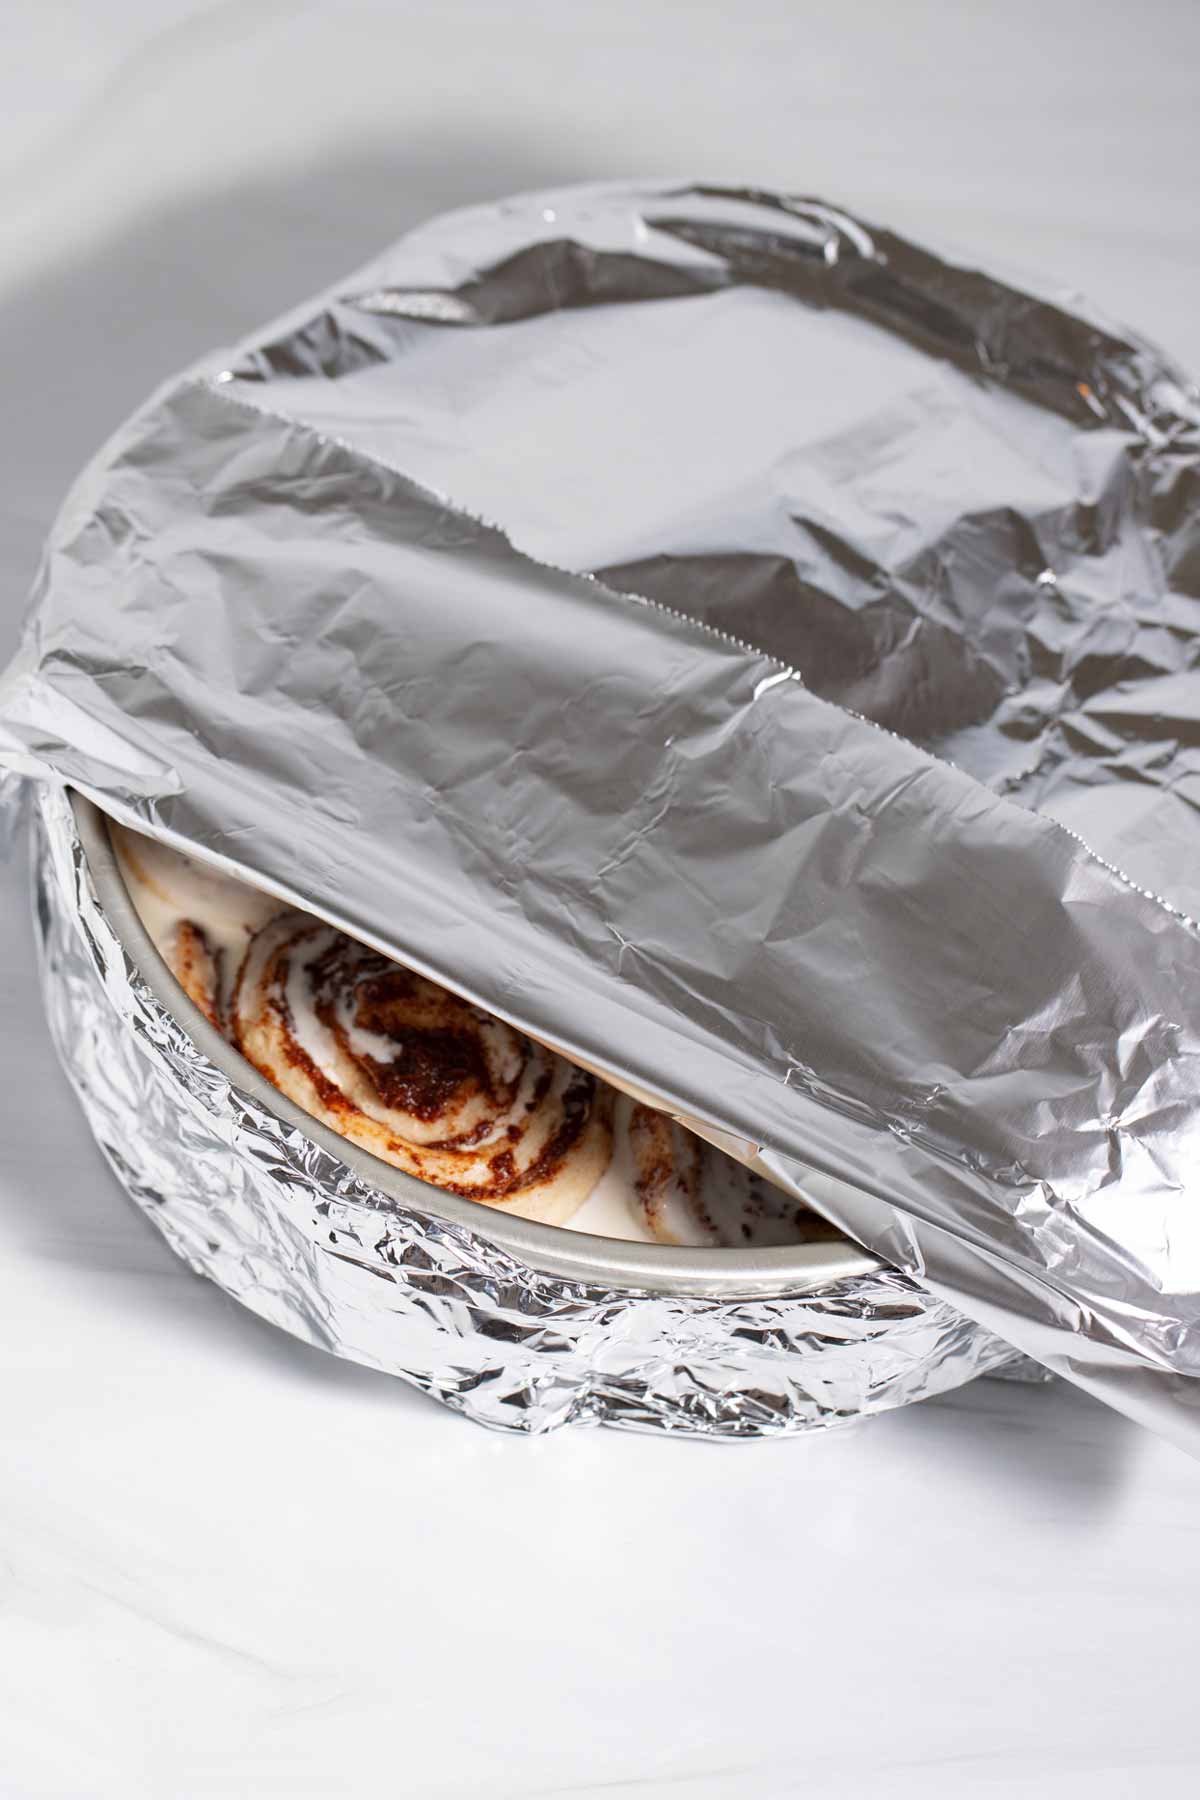 Foil covering the pan of canned unbaked cinnamon rolls.